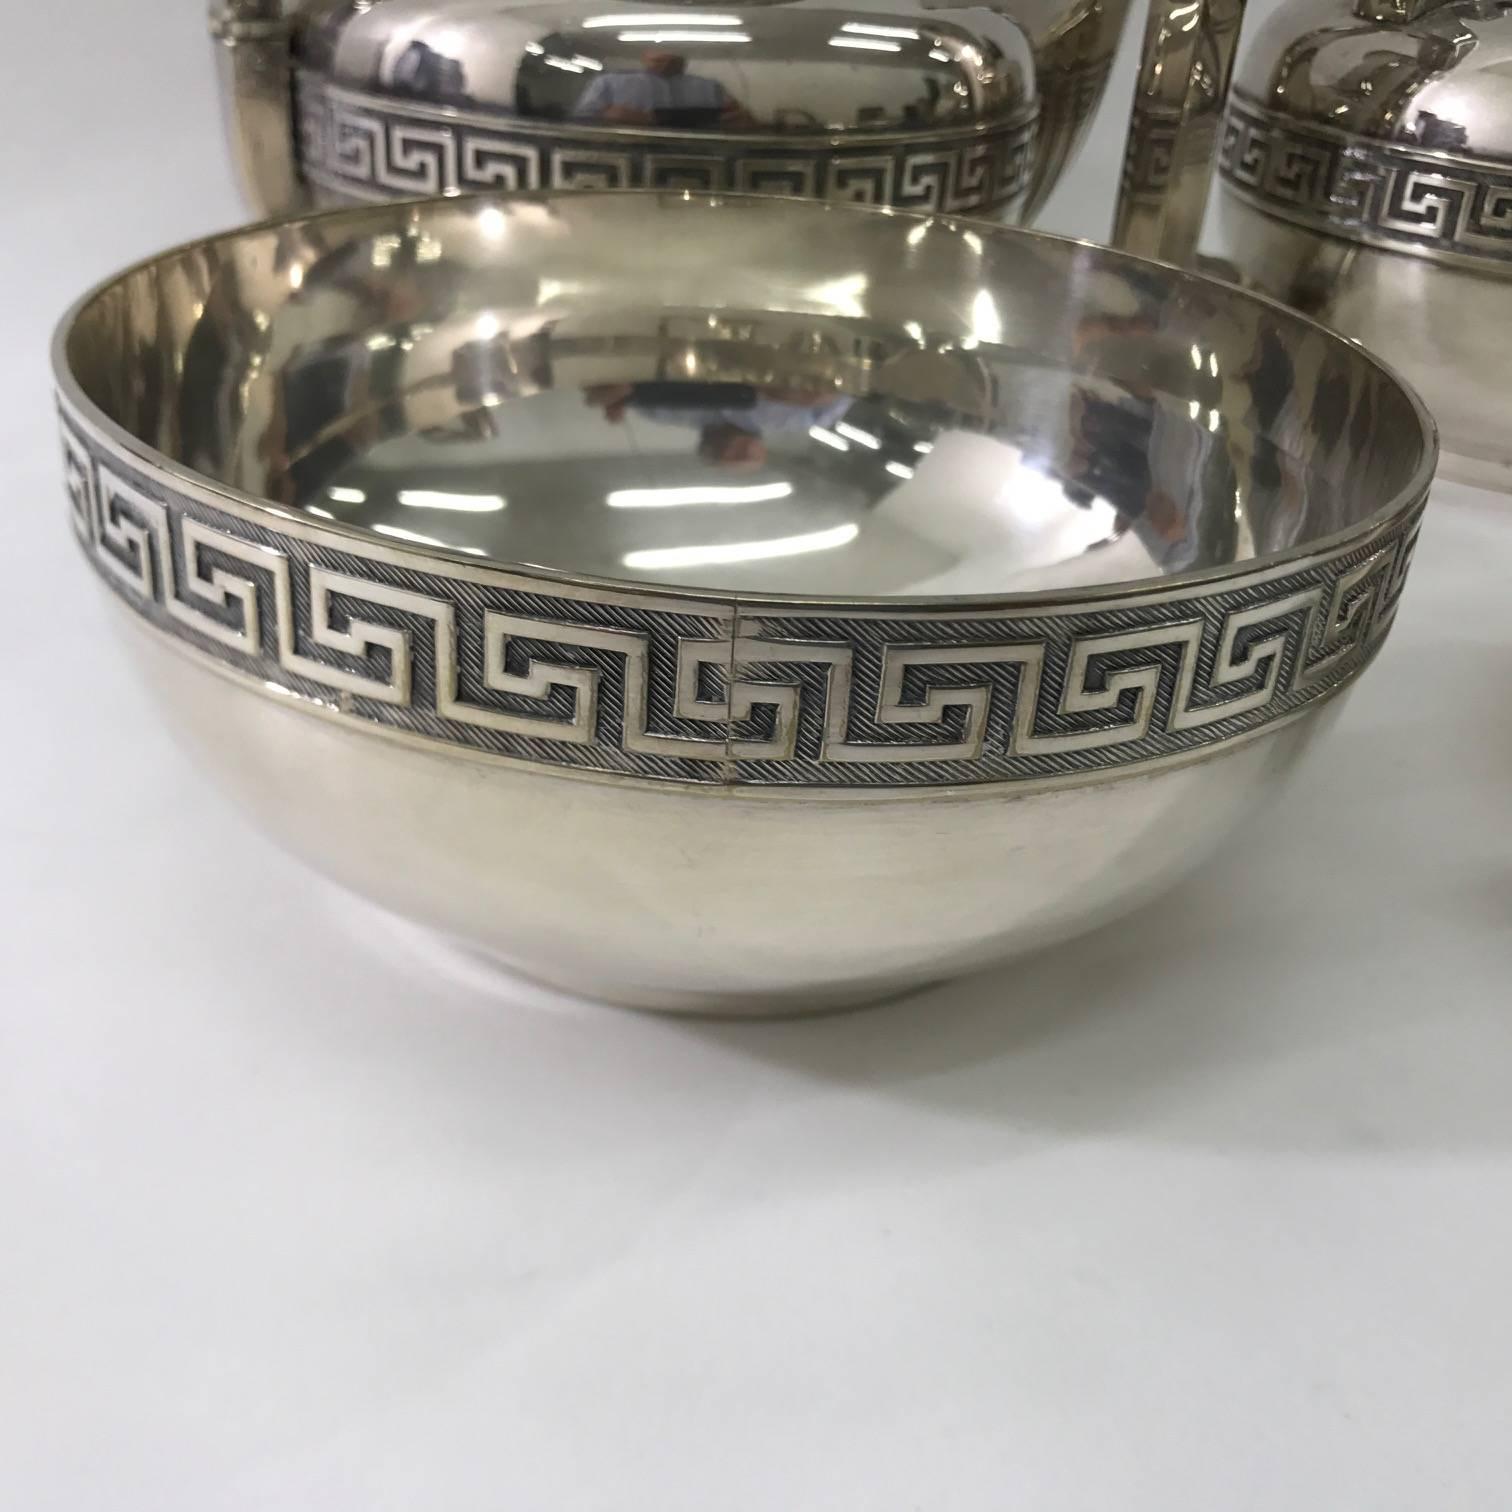 Linear and elegant set. 4 pieces in silver plated. It is composed of coffee pot, tea pot, sugar bowl and milk server, the objects have excellent proportions, are worked with extreme care, the handles have a  very refined shape, a pleasant and sober